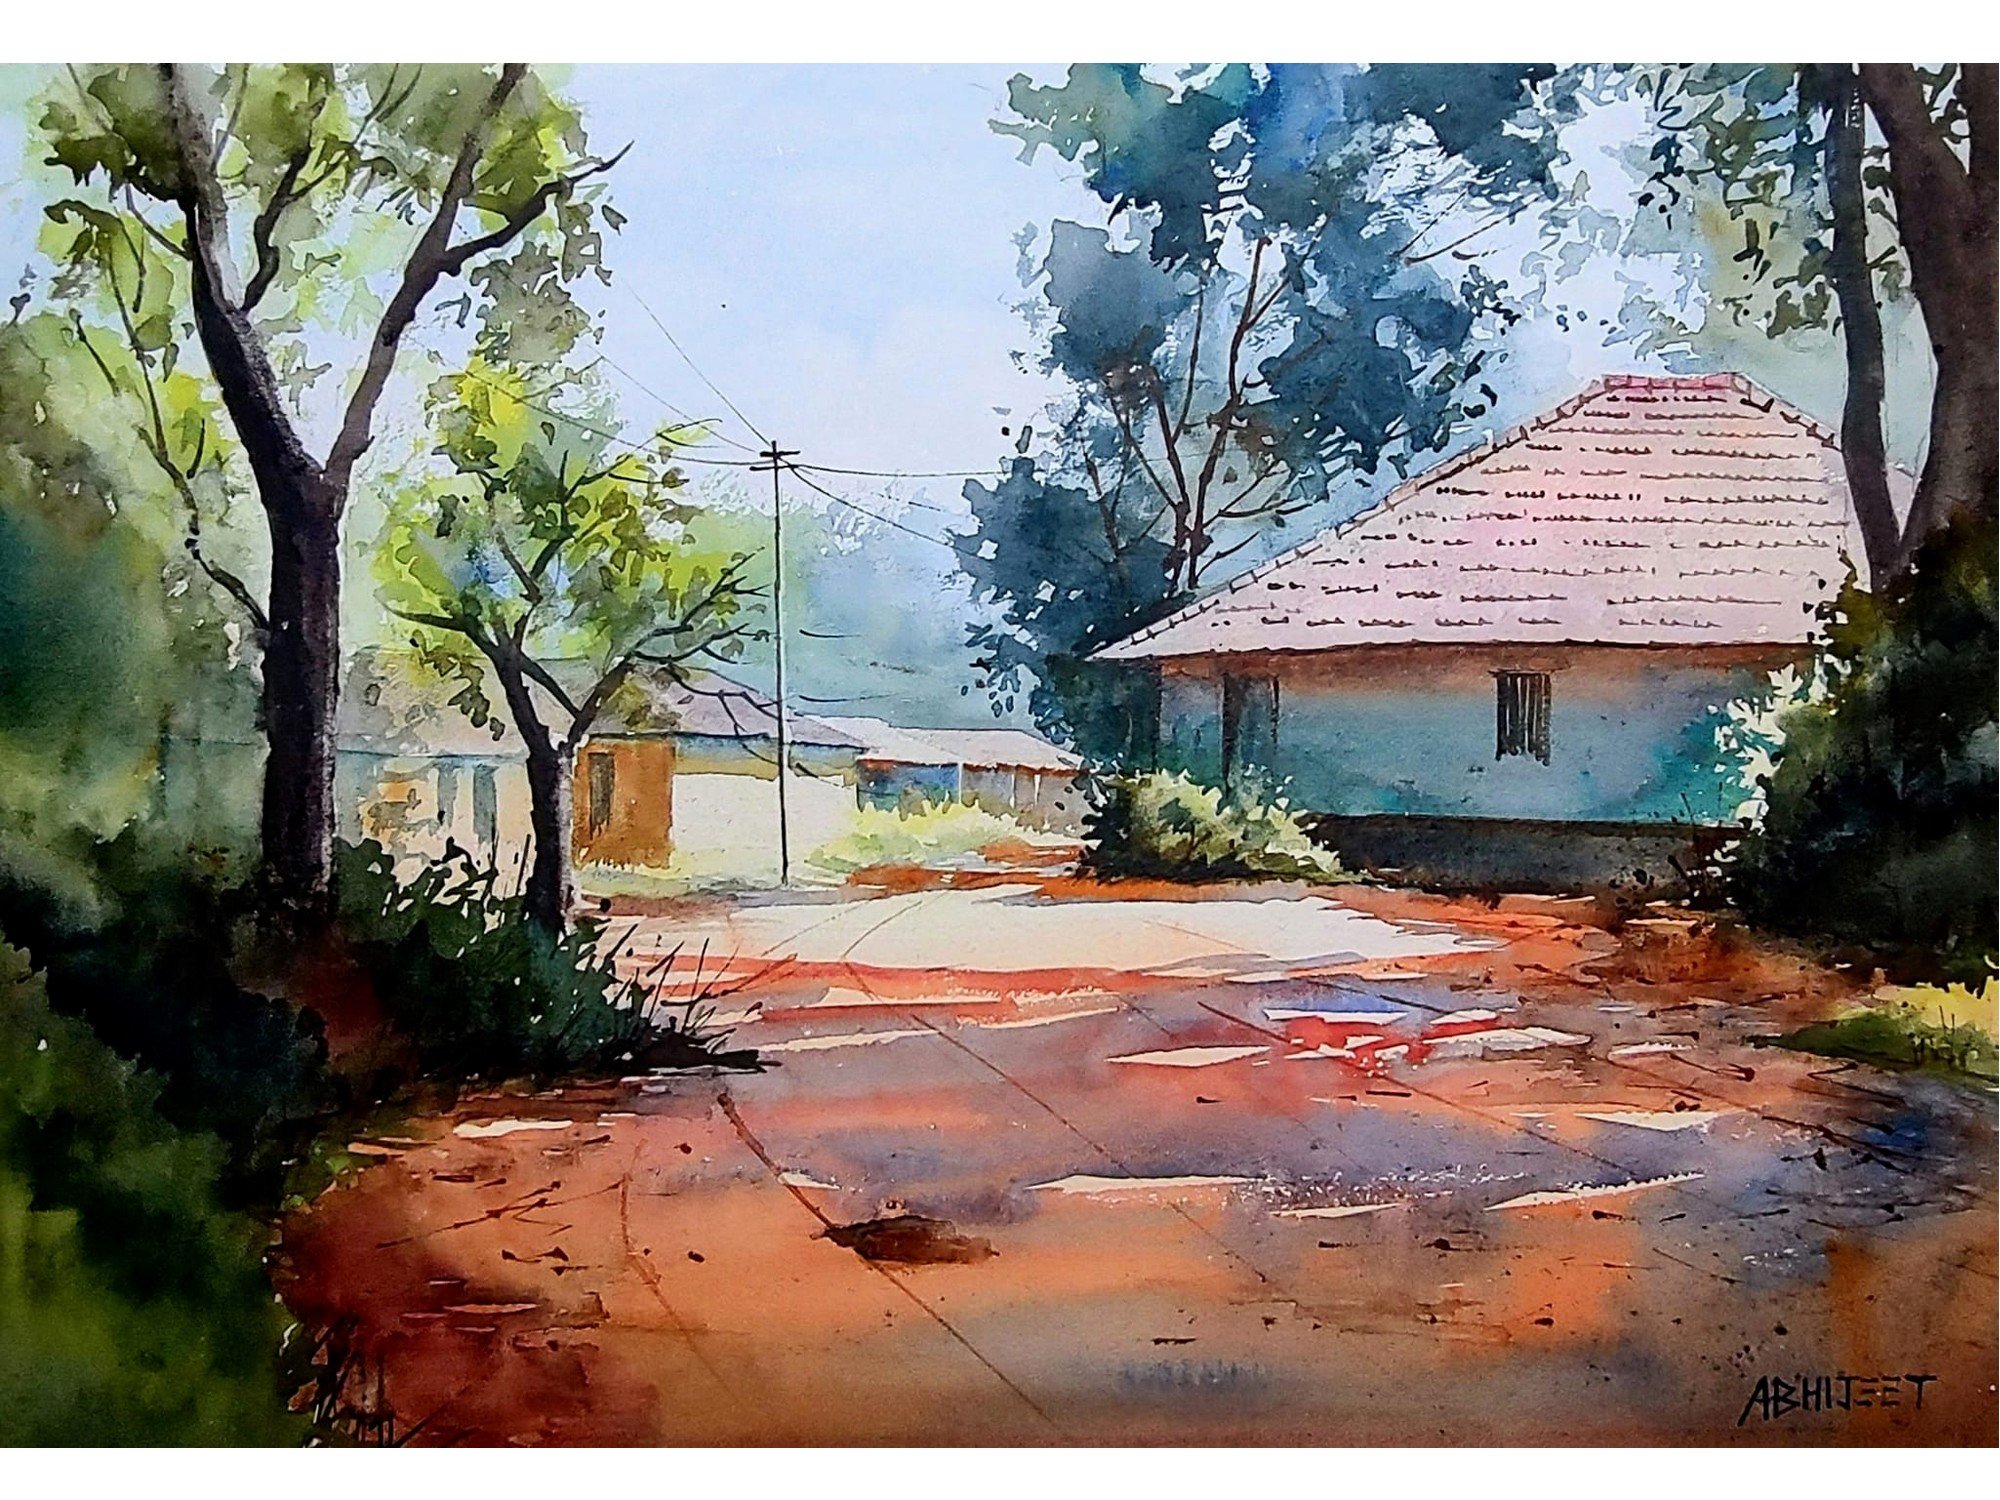 A South Indian Village Watercolor On Paper By Abhijeet Bahadure Exotic India Art